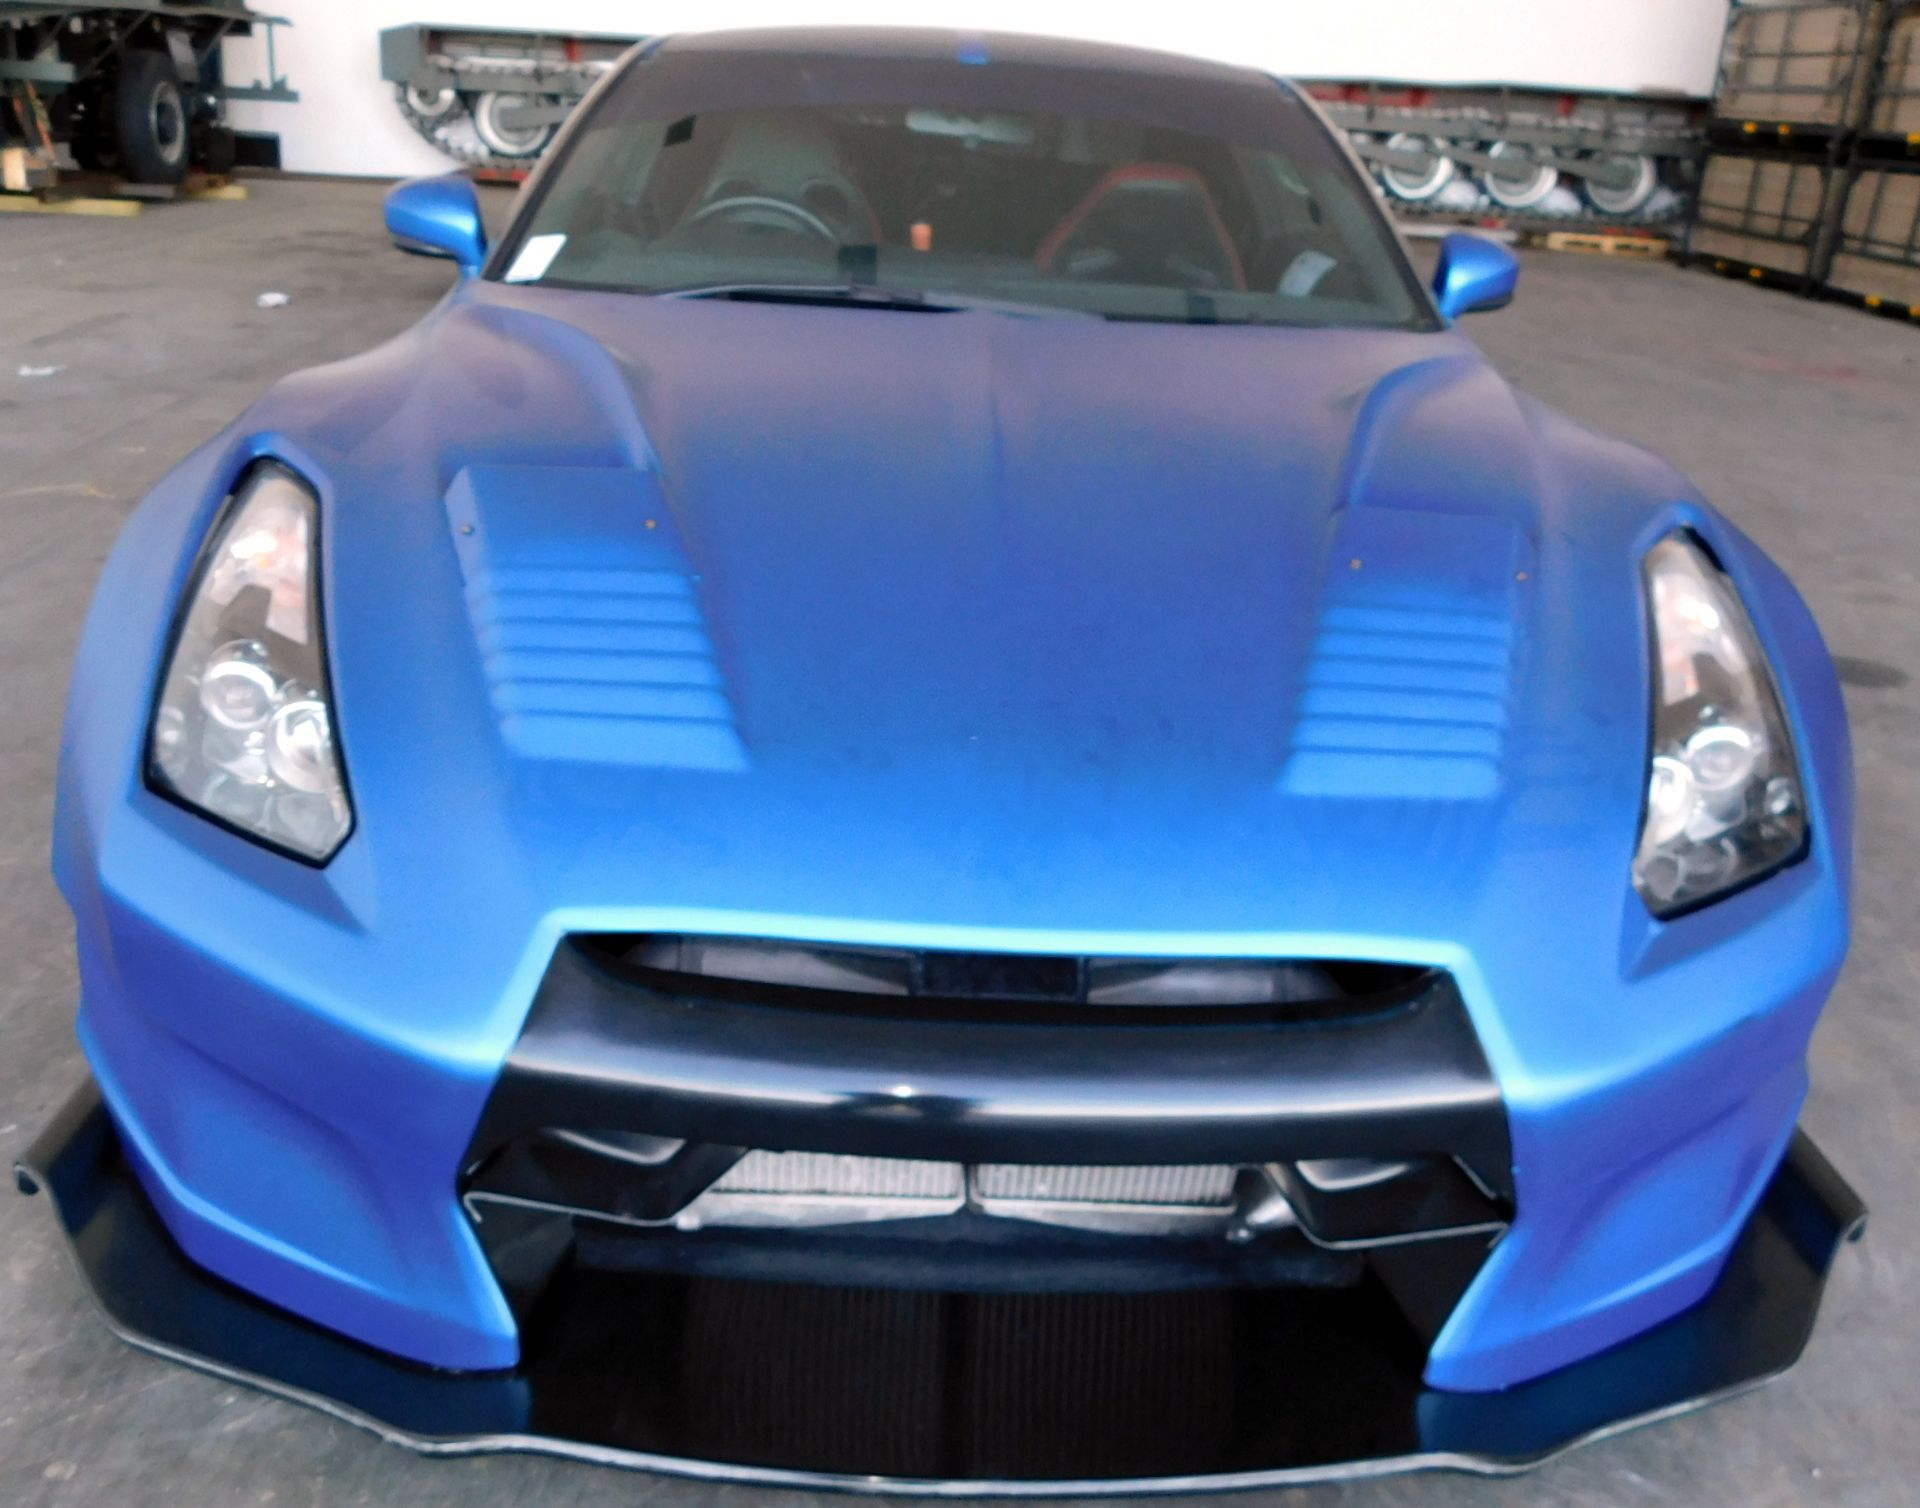 Nissan GTR 2 Door RHD Coupe, 3.8 Litre Engine, Manual Gearbox, Bensopera Body Kit, Not Road Legal, - Image 6 of 12